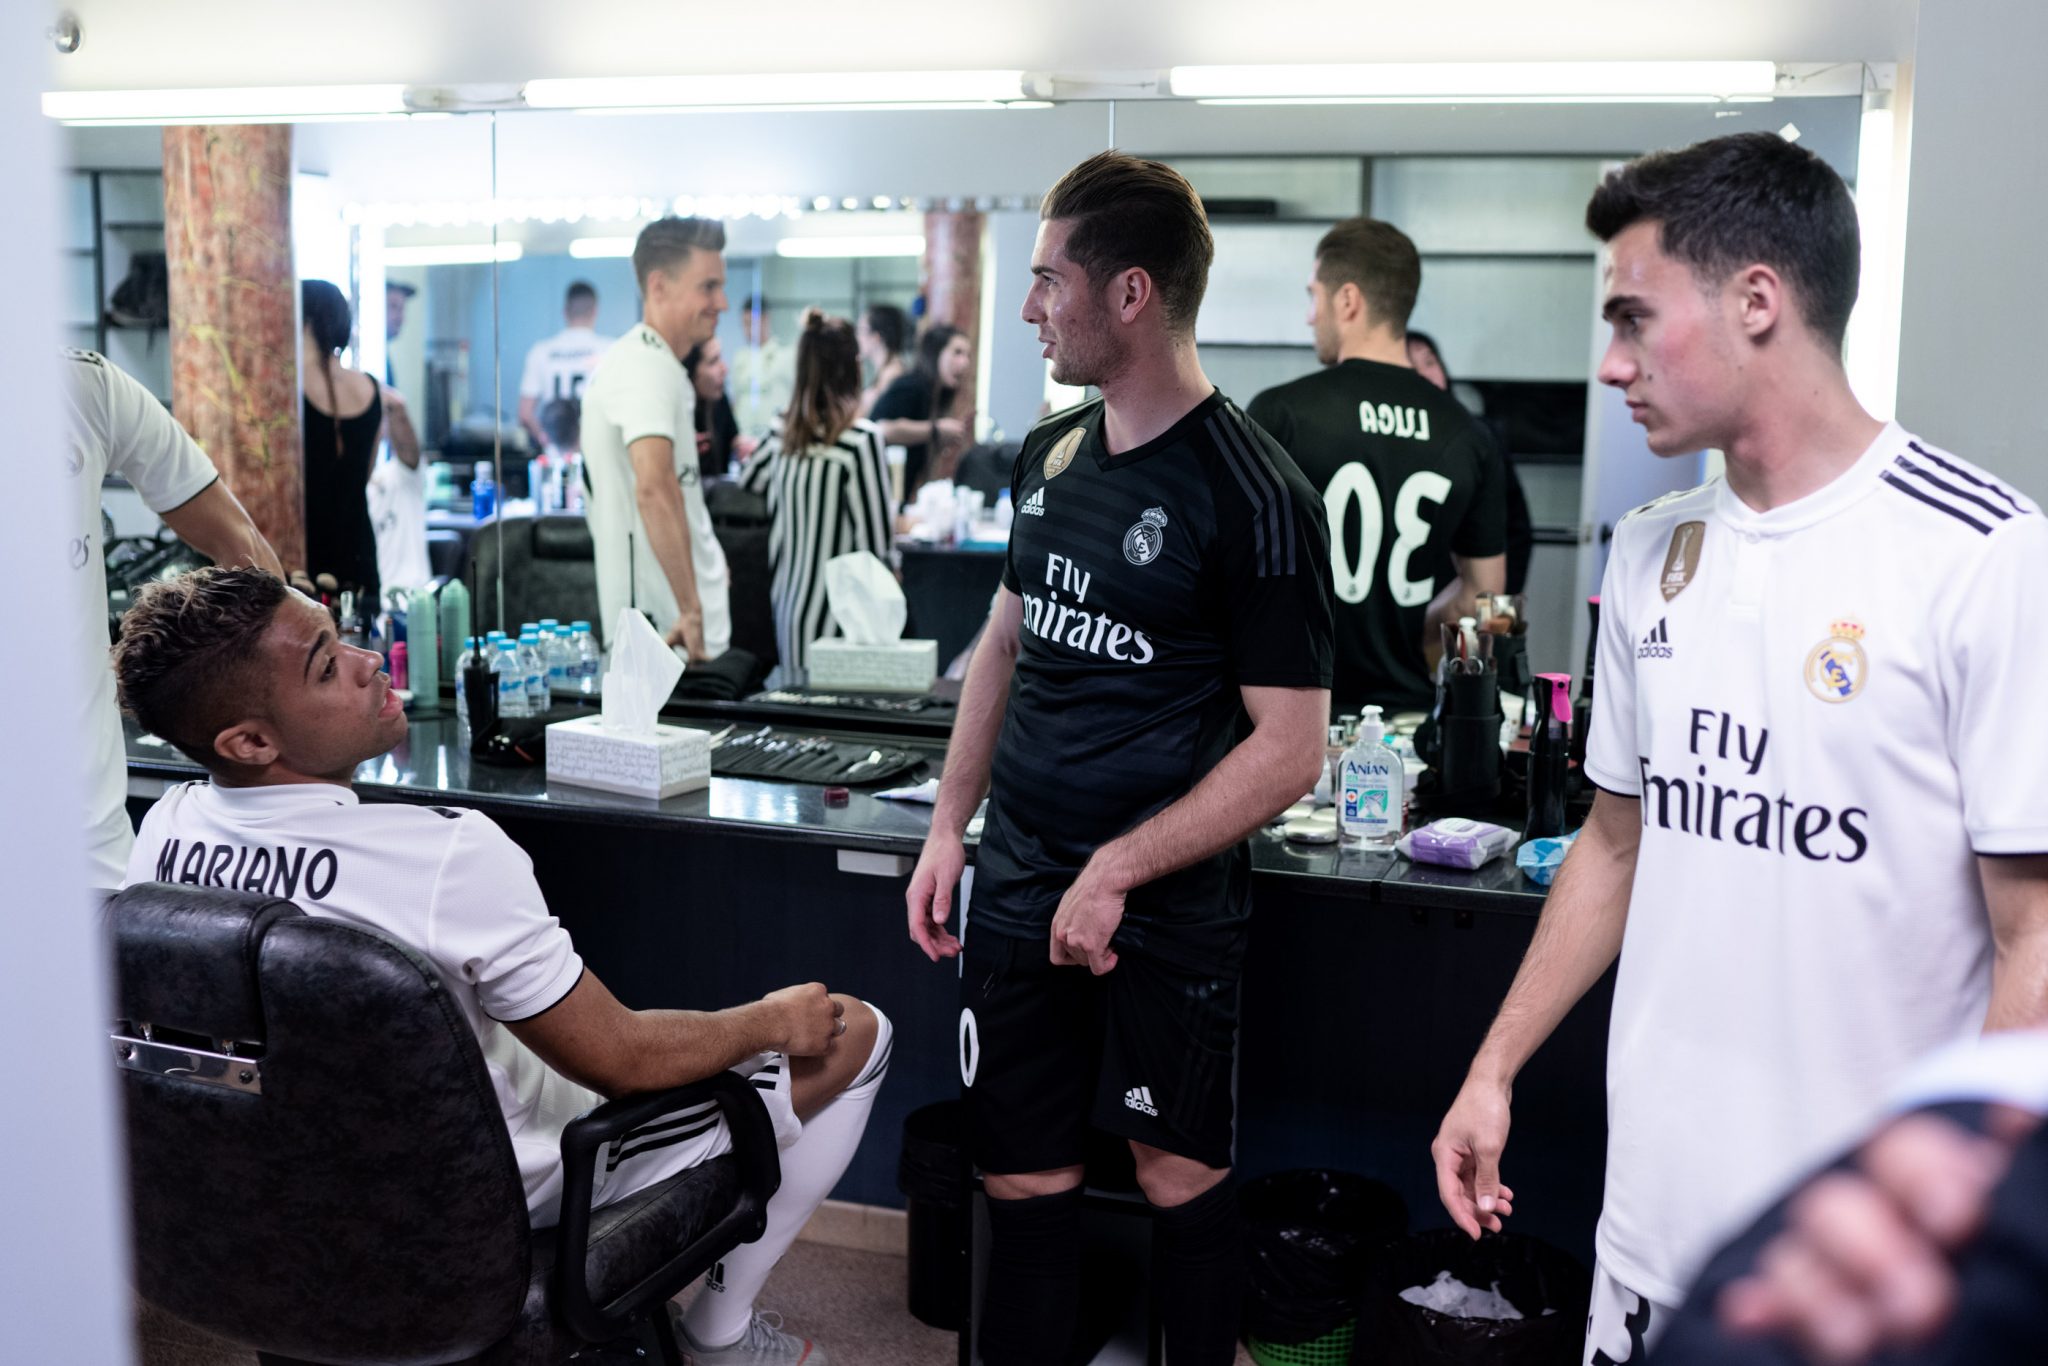 David LaChapelle | Audi x Real Madrid | Behind-the-scenes photographs from the Audi E-tron launch shoot in Madrid. | 23